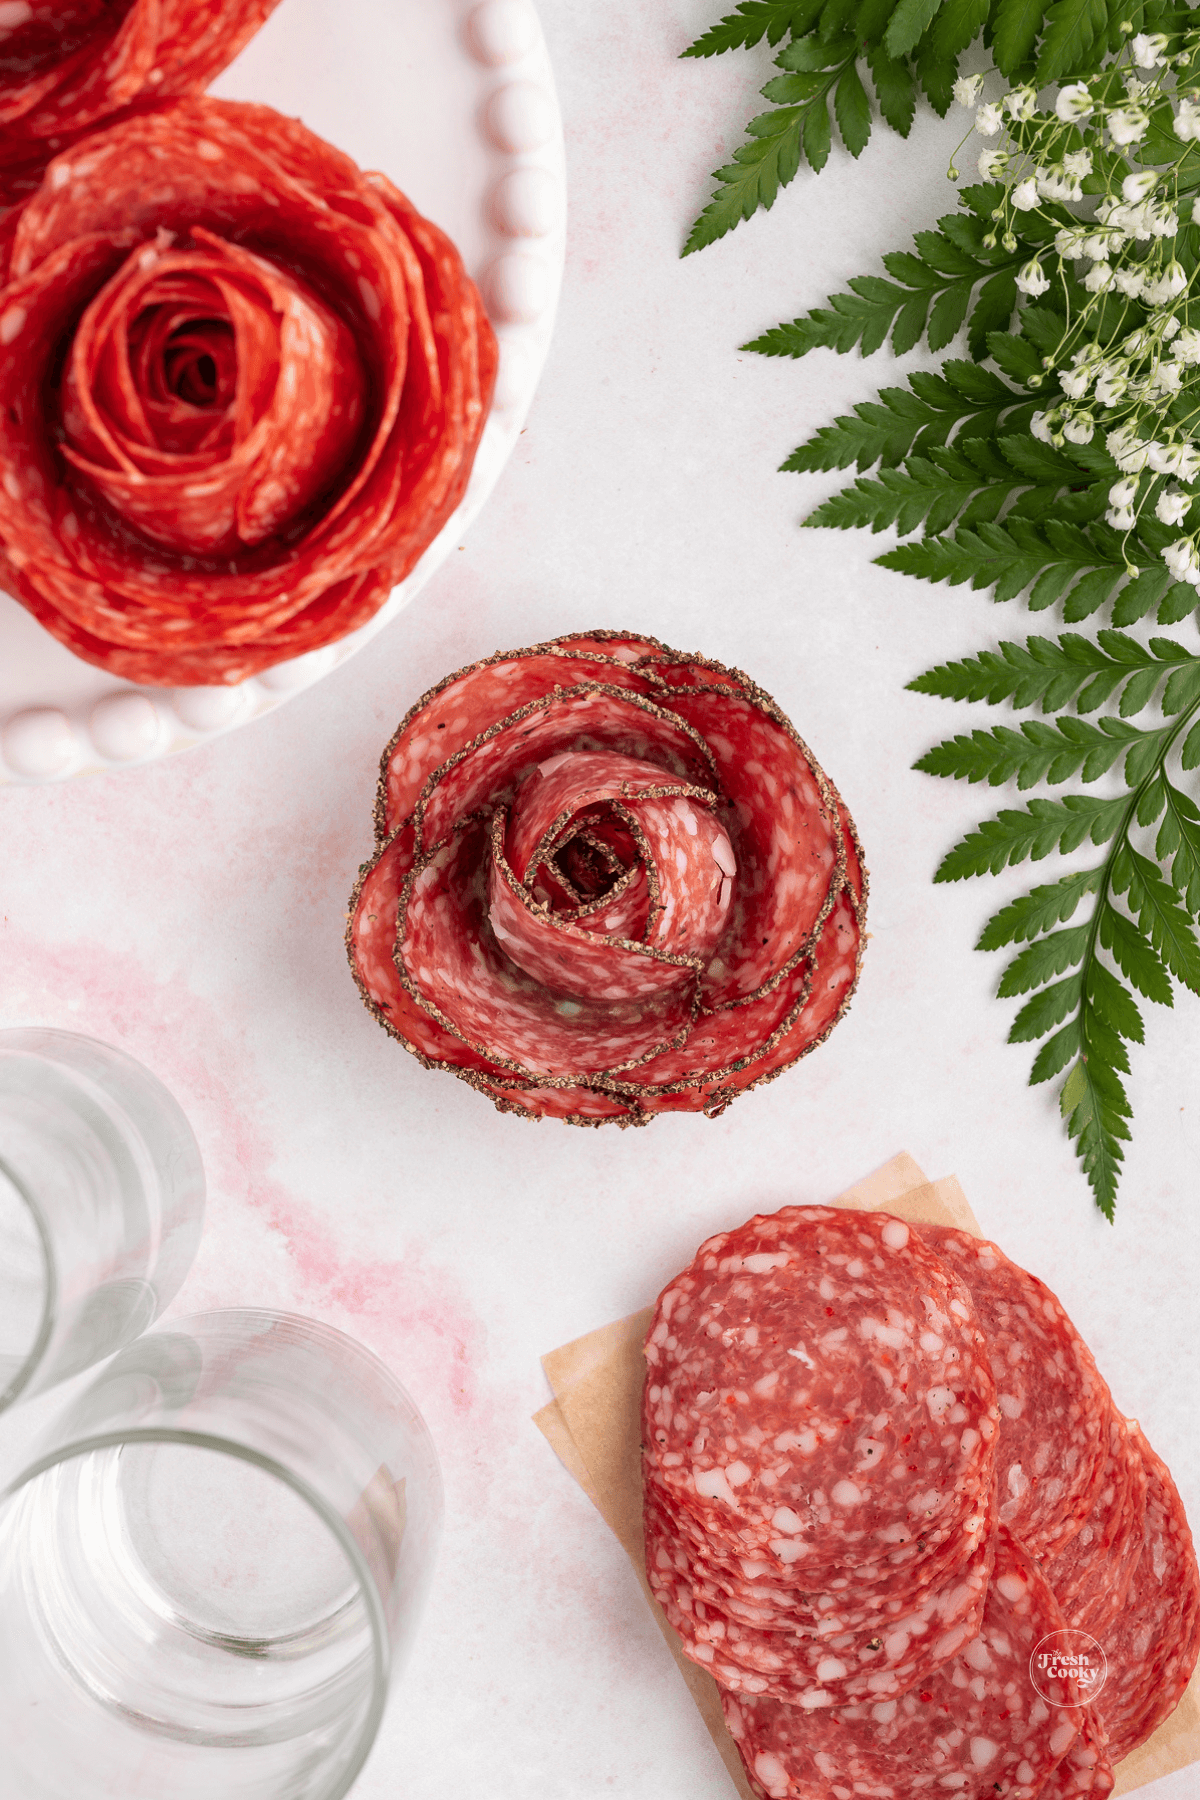 Salami roses on table after removing glass.